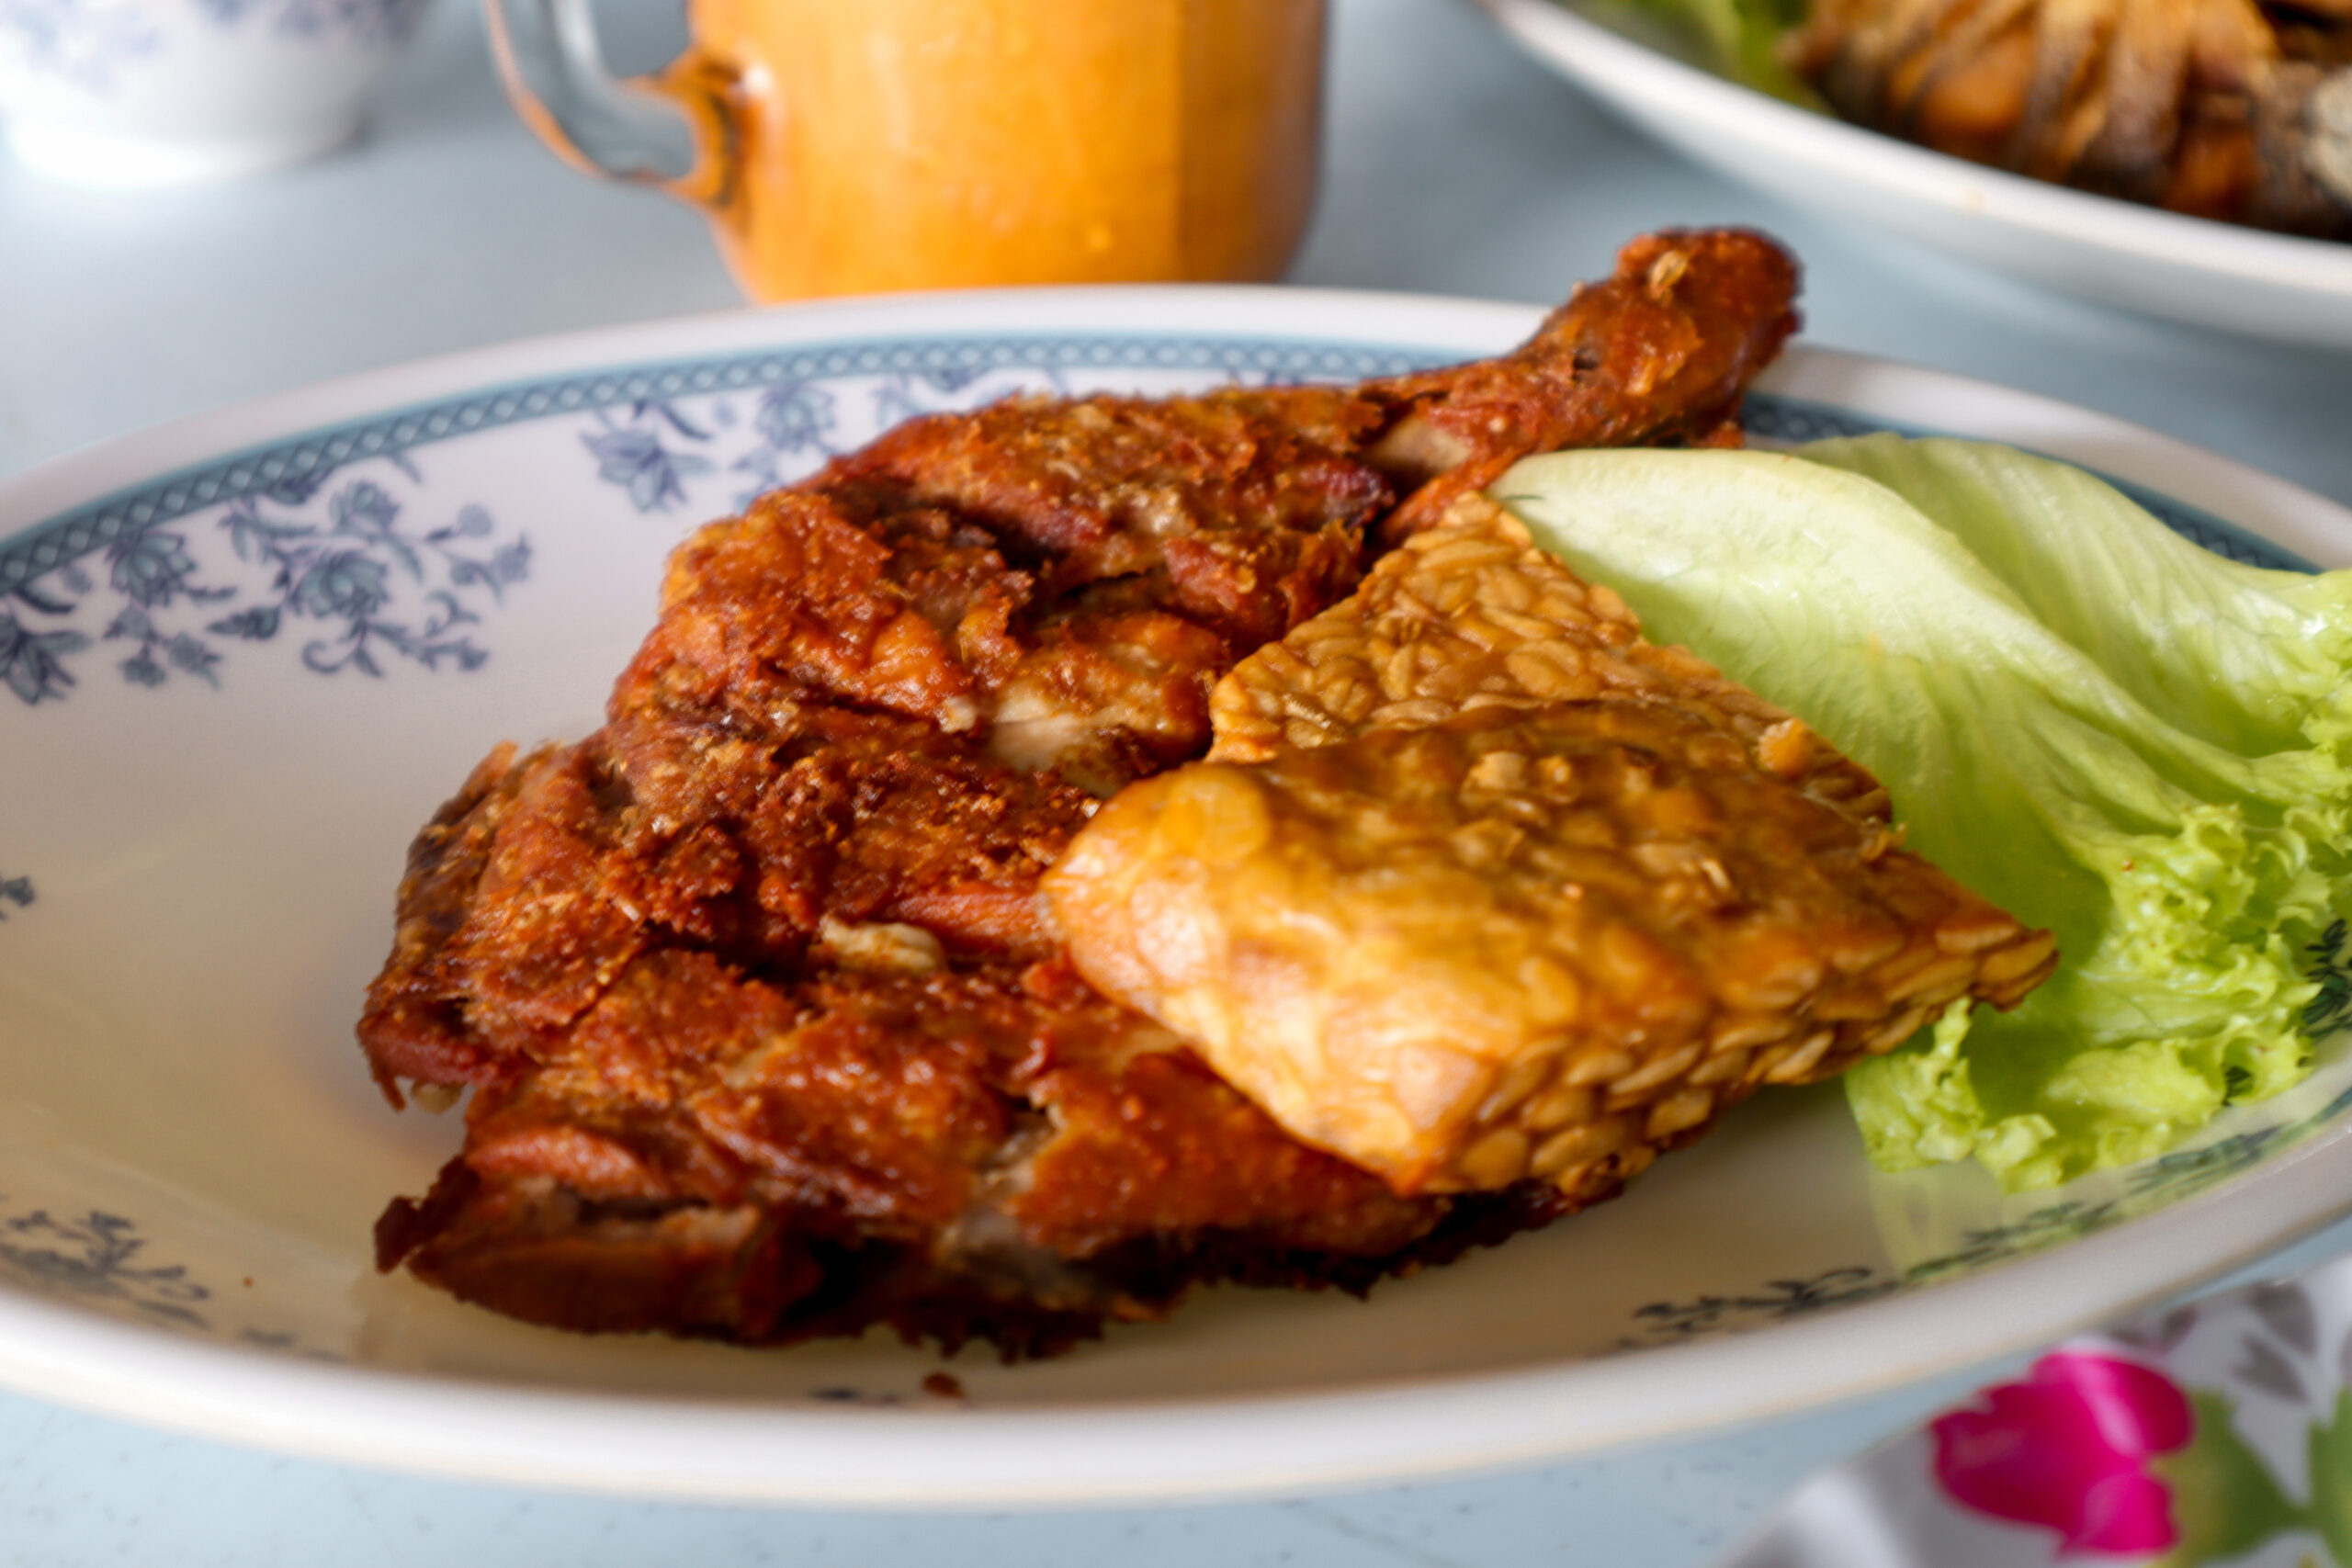 Randomly eating at this Shabby-Looking Sungai Besi Ayam Penyet Store and it was OK | OnlyFoodKL